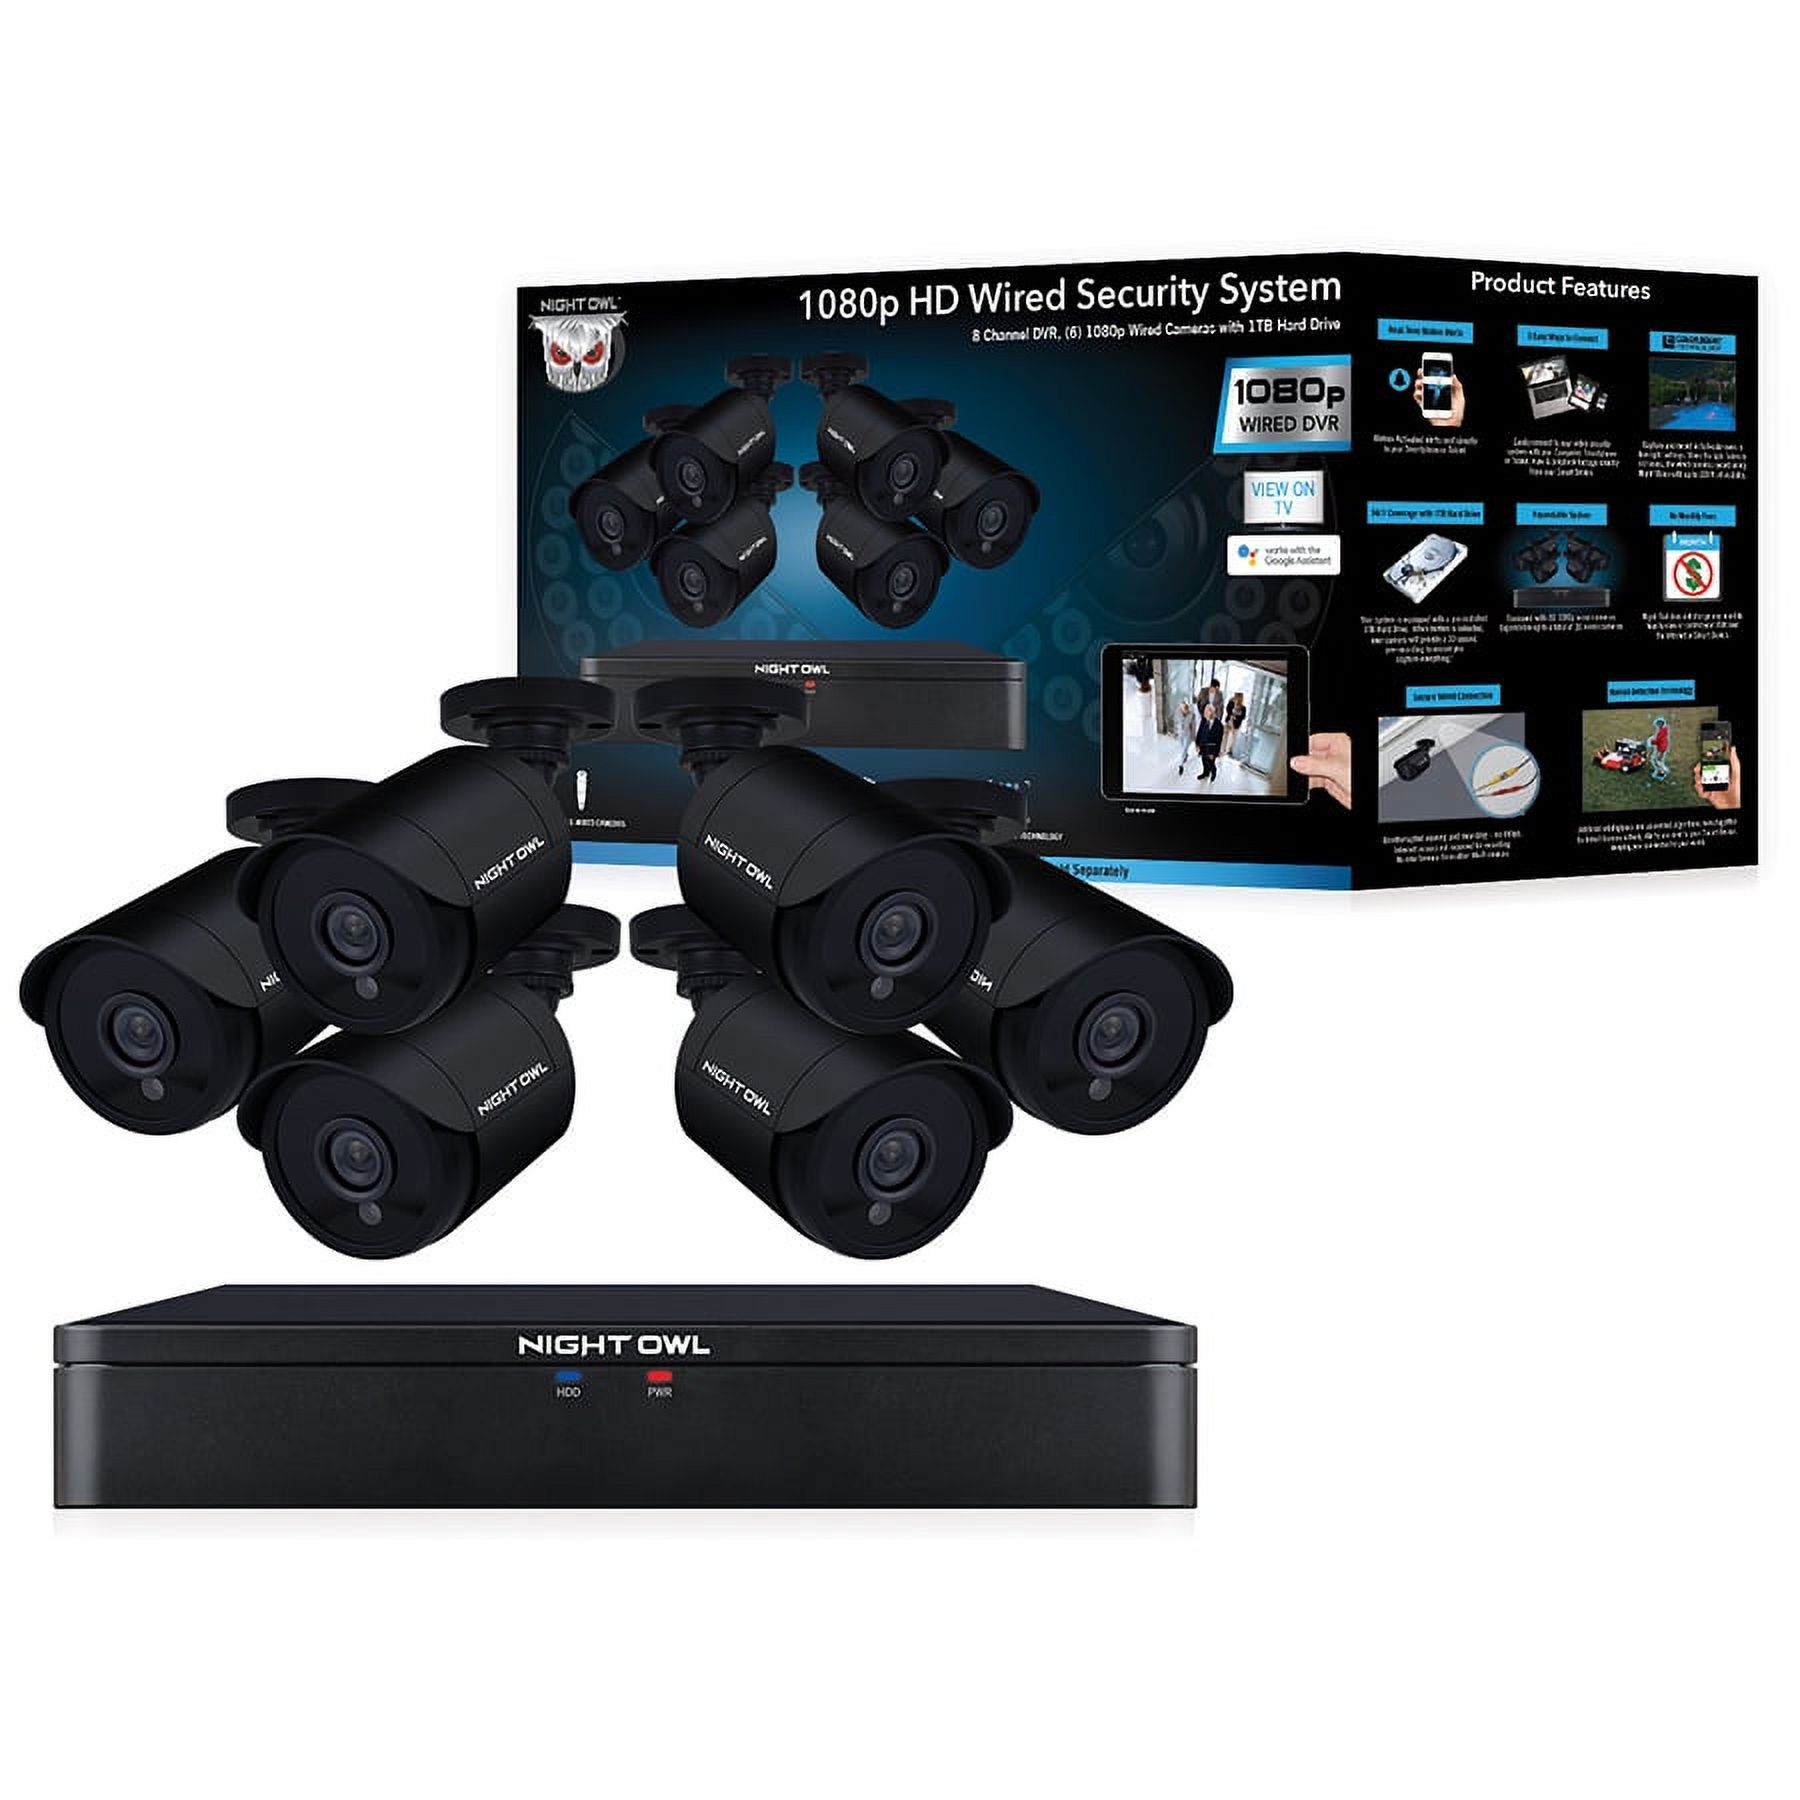 Night Owl's 8 CH 1080p HD Wired Video Security System with 6 Indoor/Outdoor Cameras, Human Detection Technology and a 1TB Pre-Installed Hard Drive - image 1 of 7